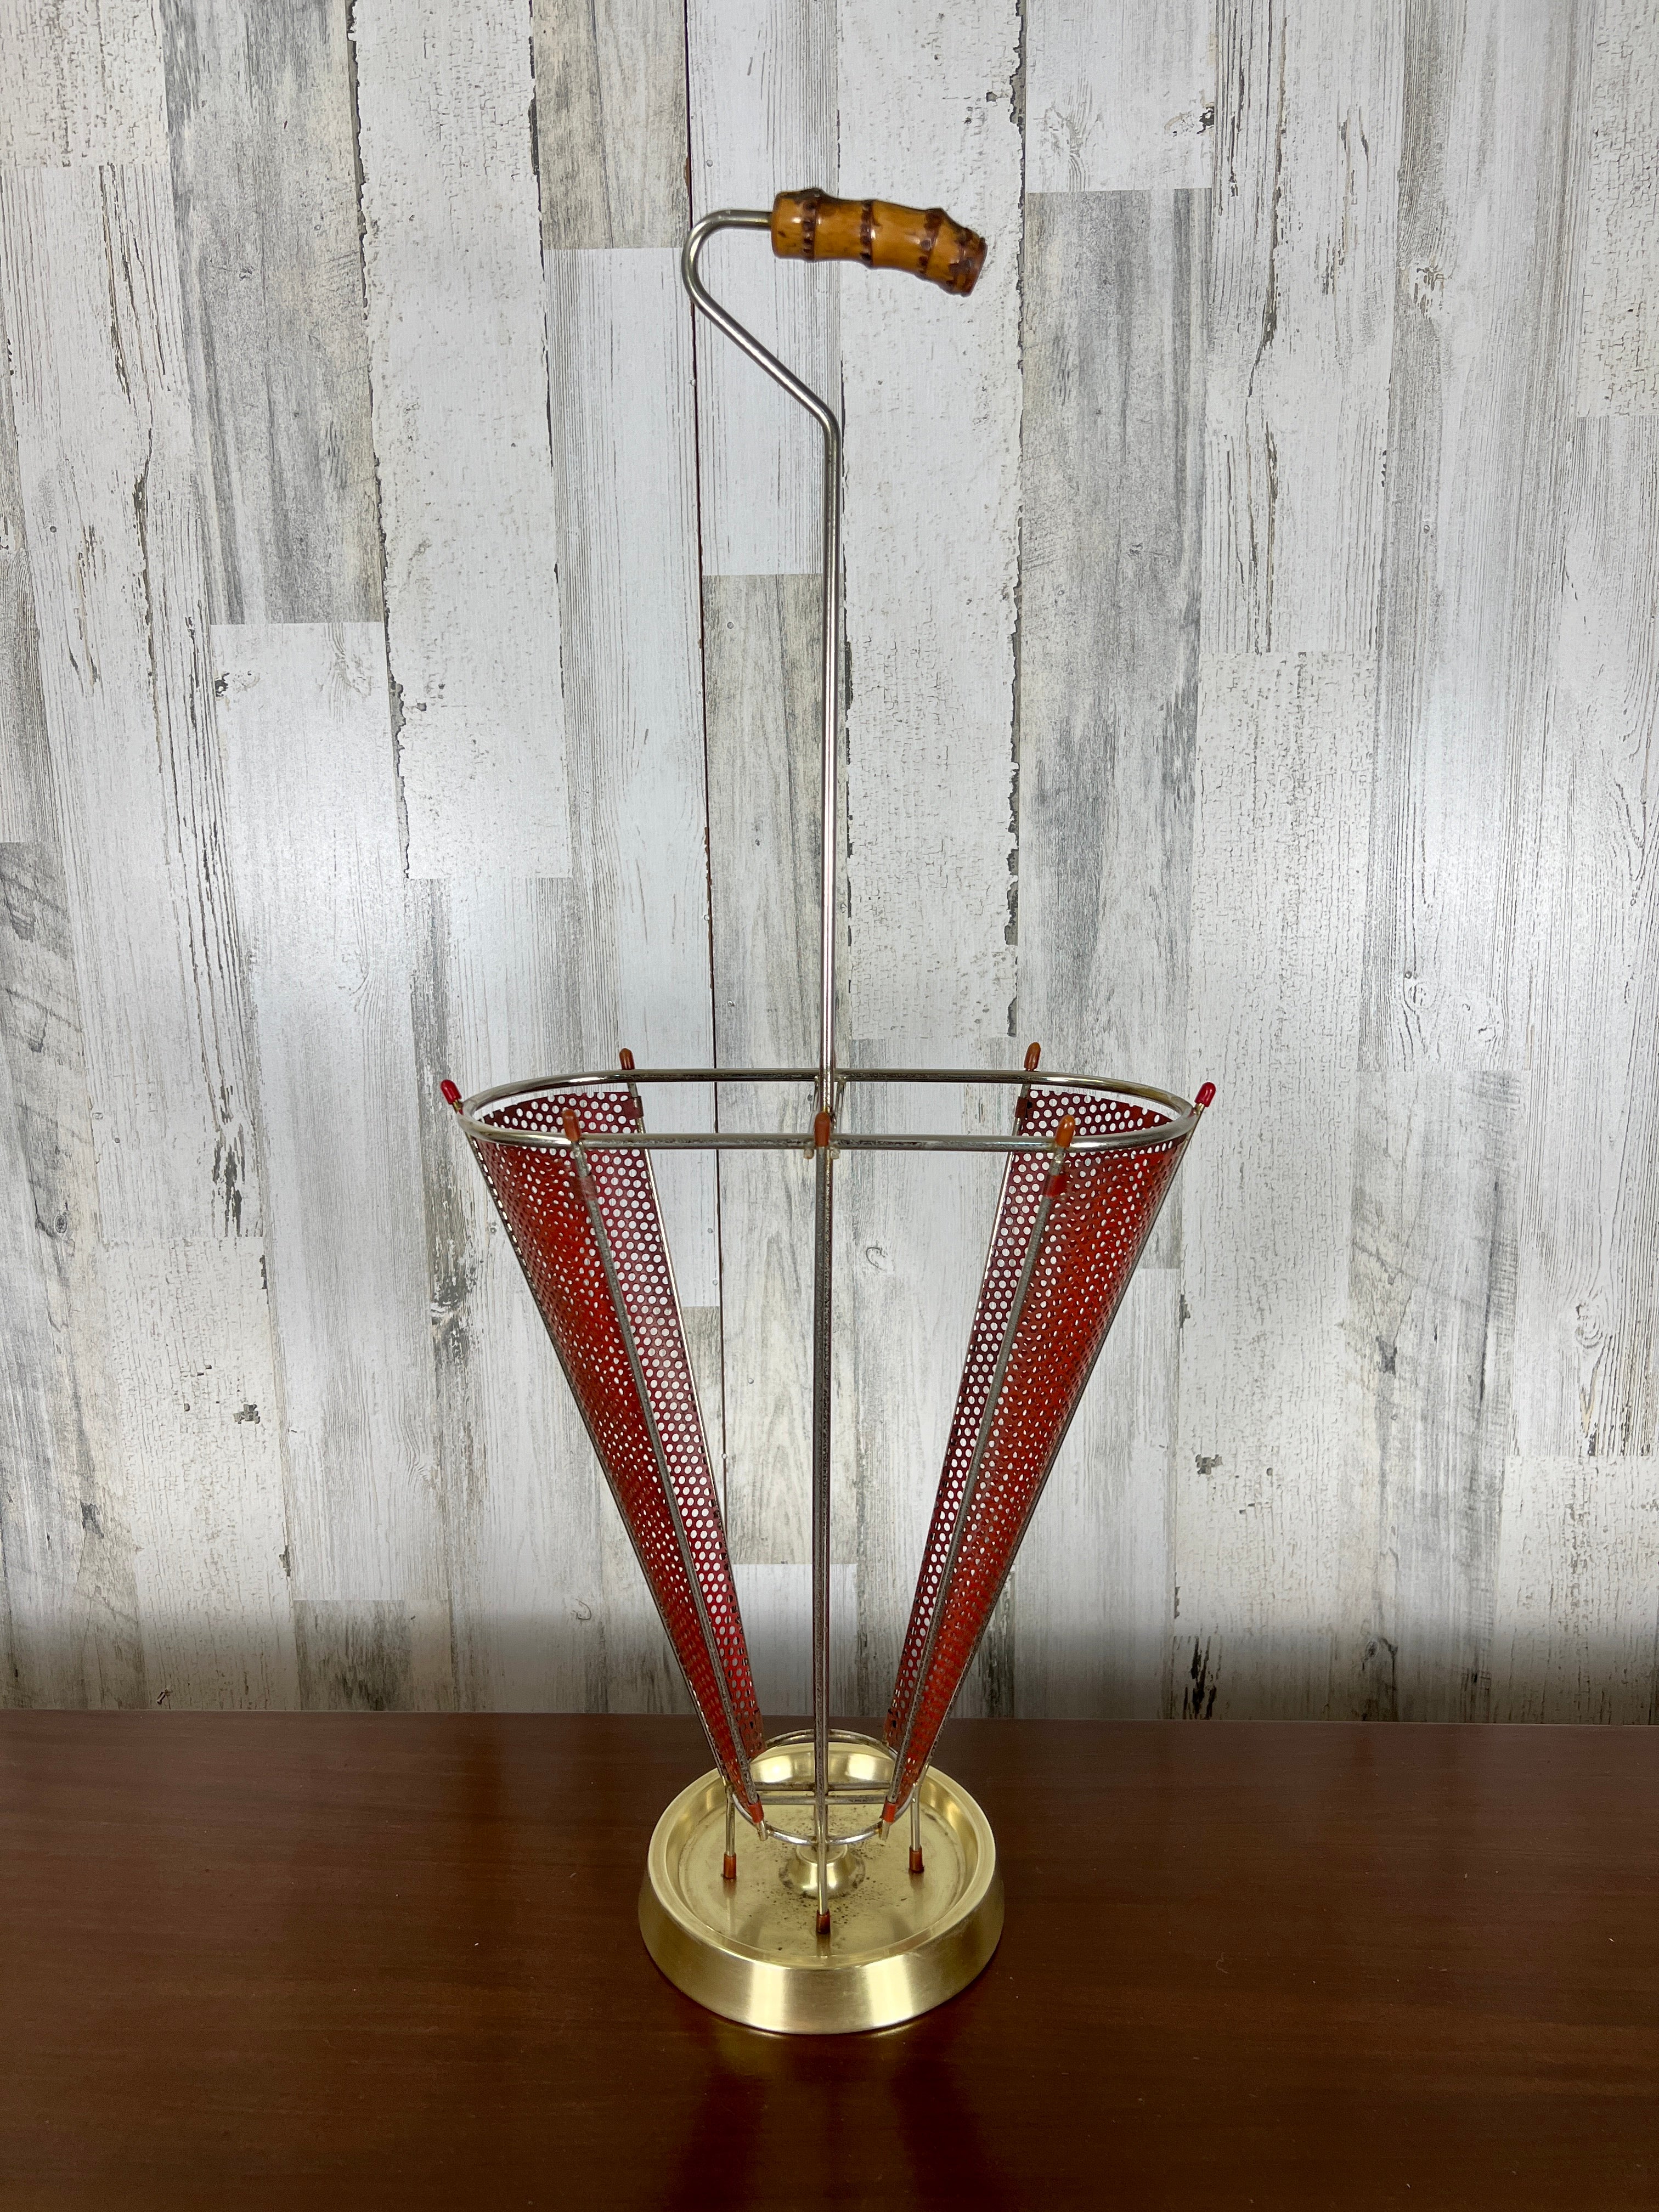 Perforated metal with original red paint and a combination of brass base with chrome frame, topped with a faux bamboo handle.